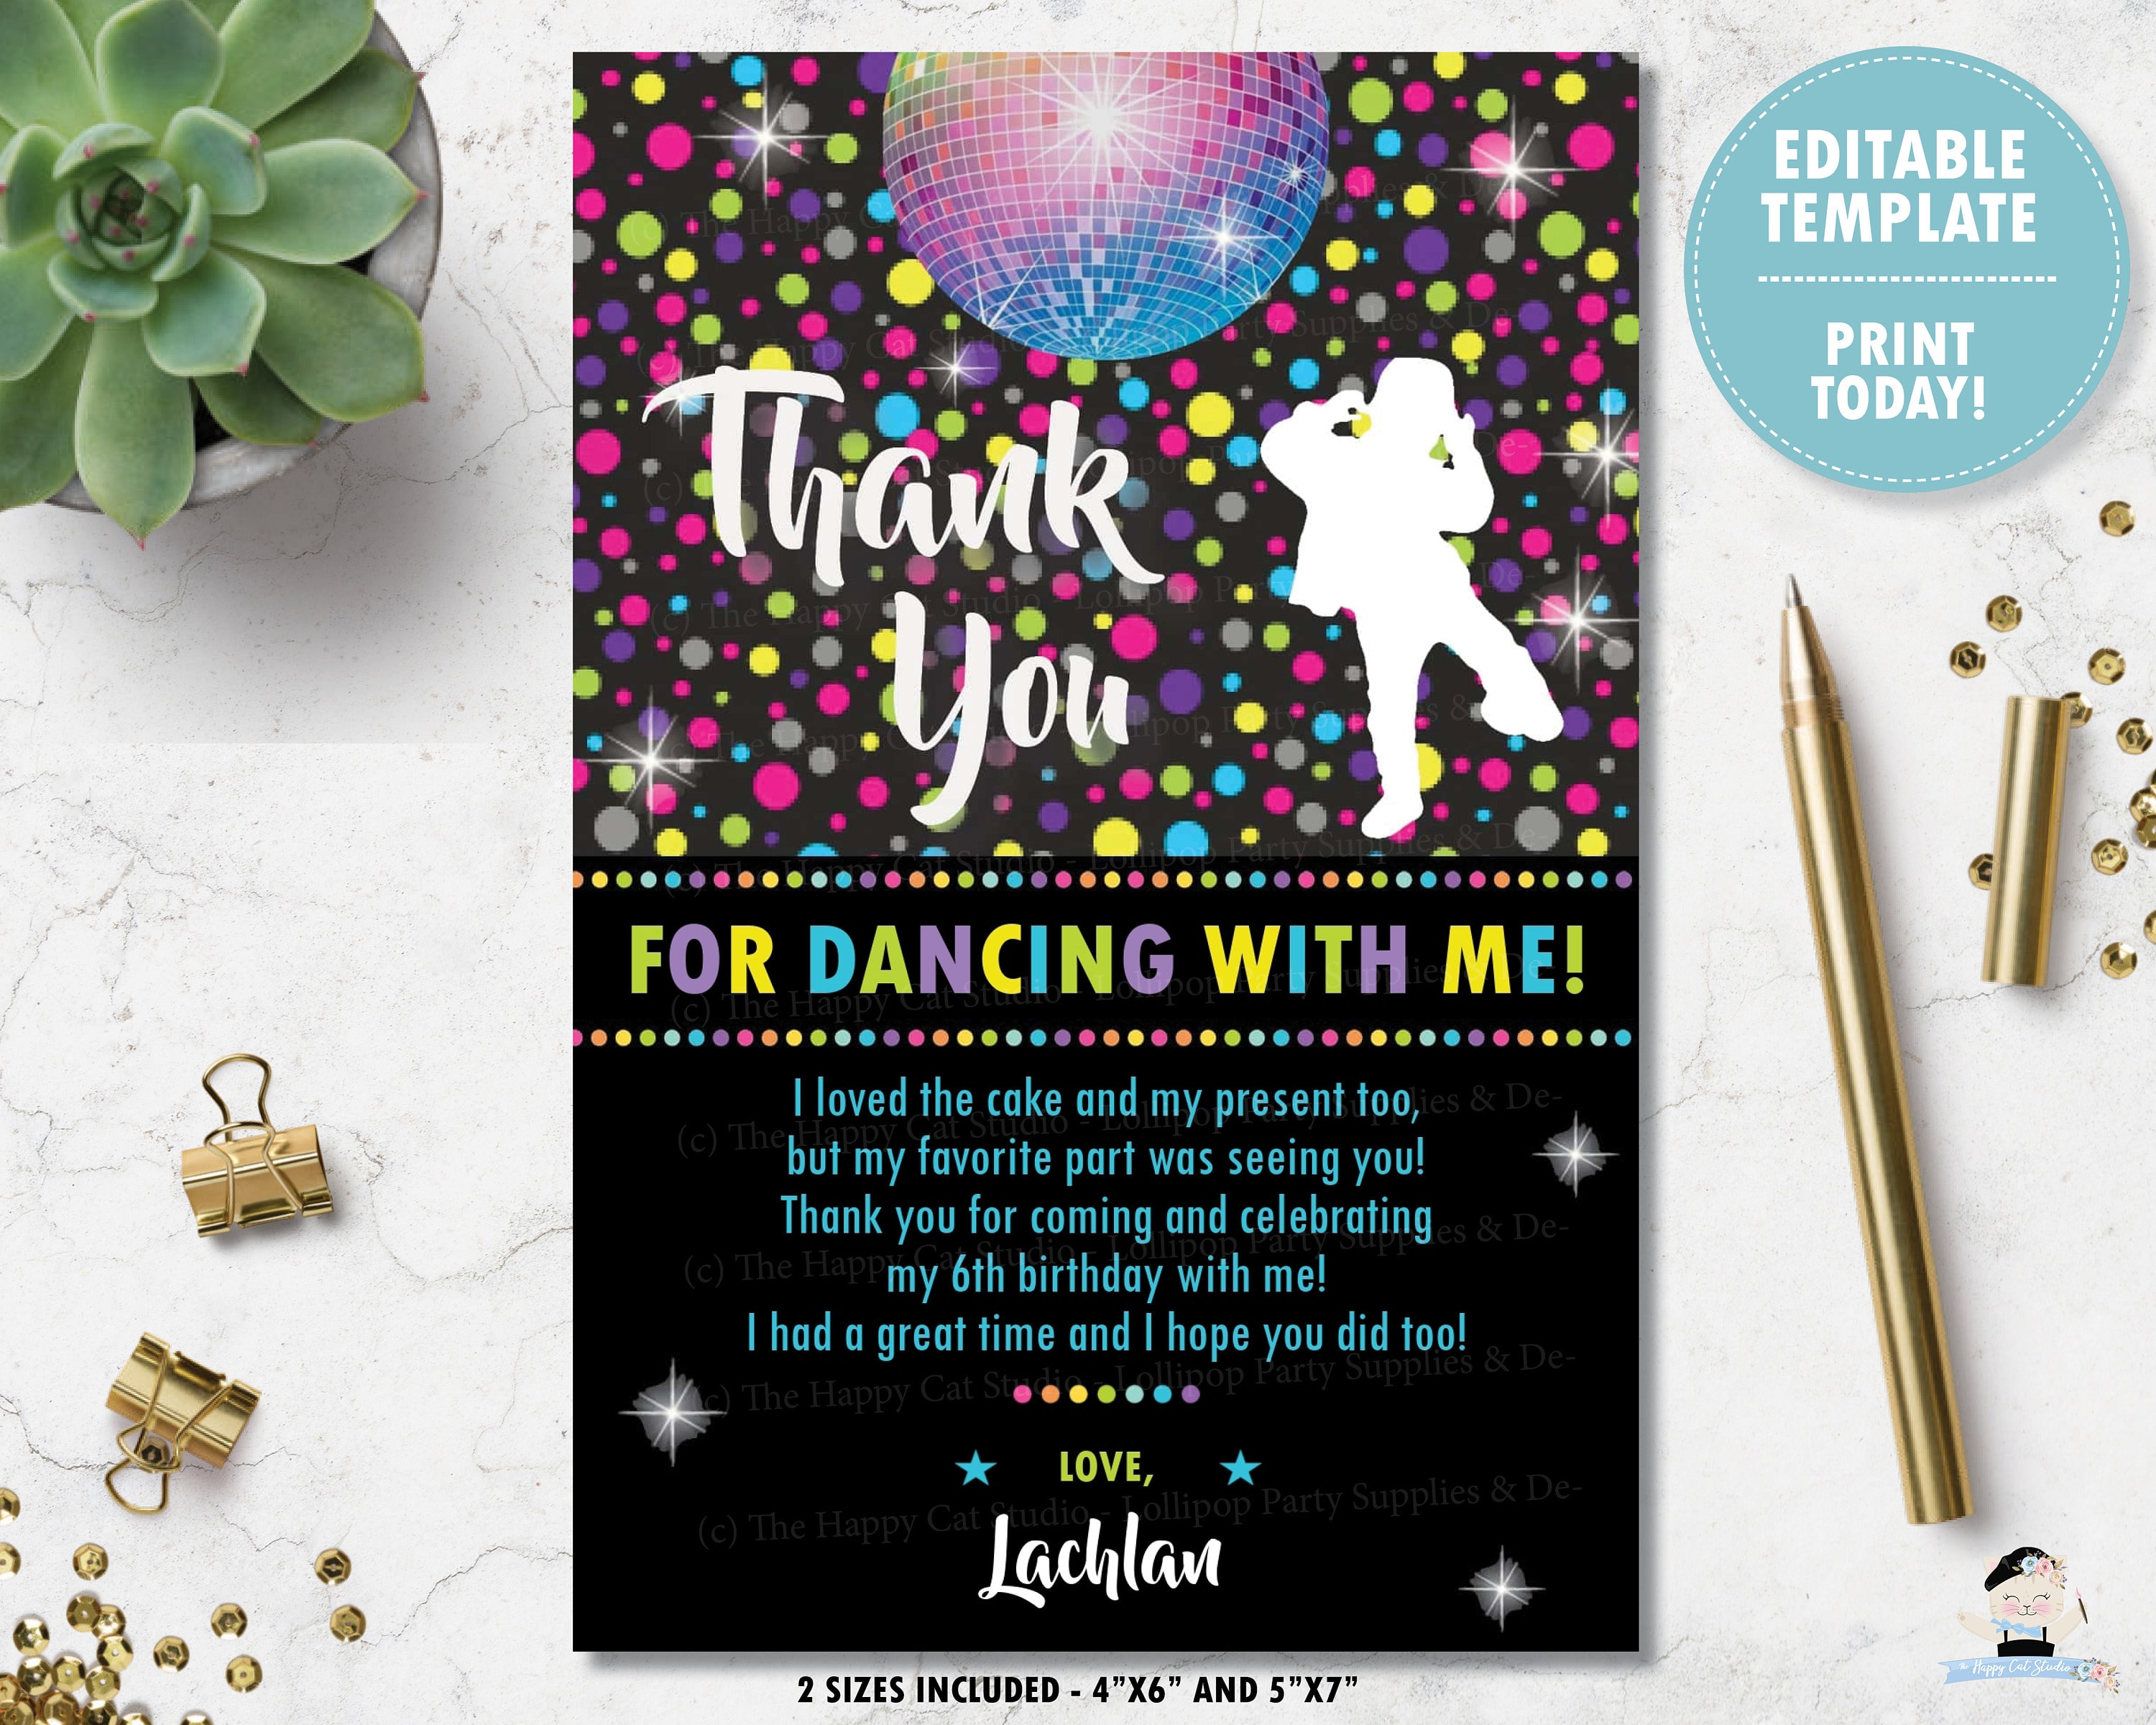 instant download printable retro notecards editable personalized stationery disco thank you card template 70s theme bridal shower